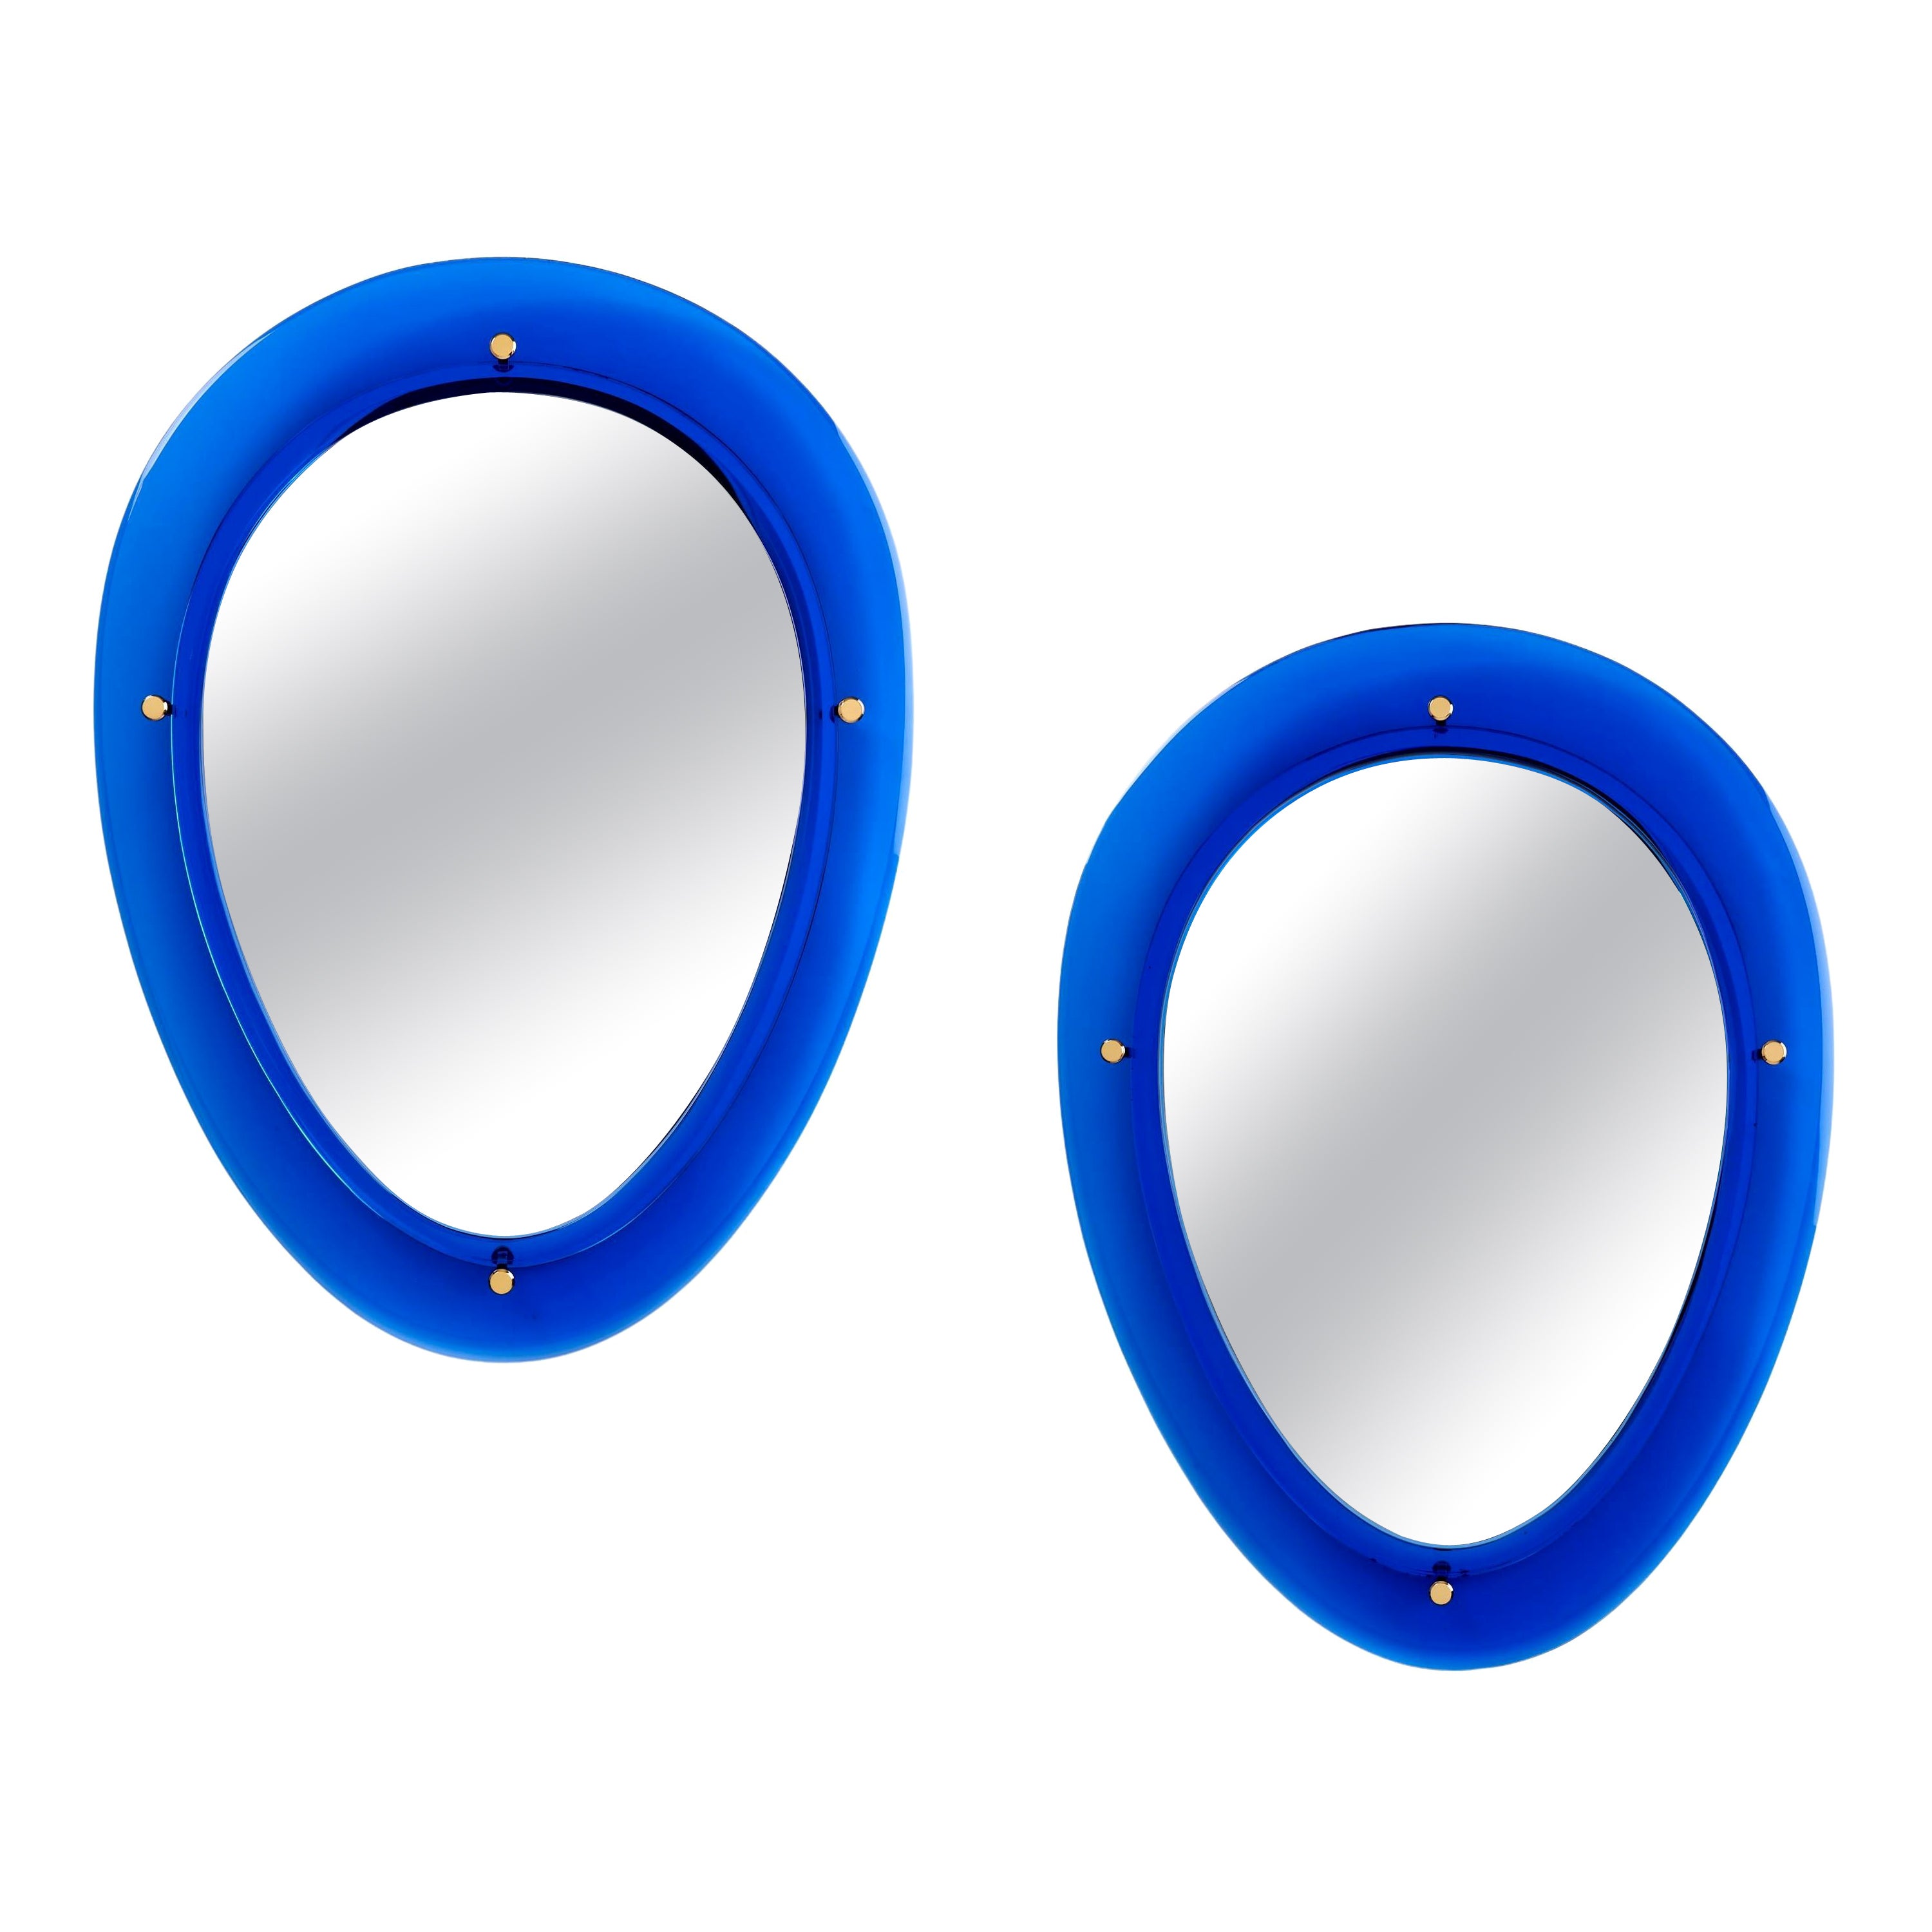 Pair of Blue Oval Shaped Glass Mirrors, Italy, 1960s For Sale